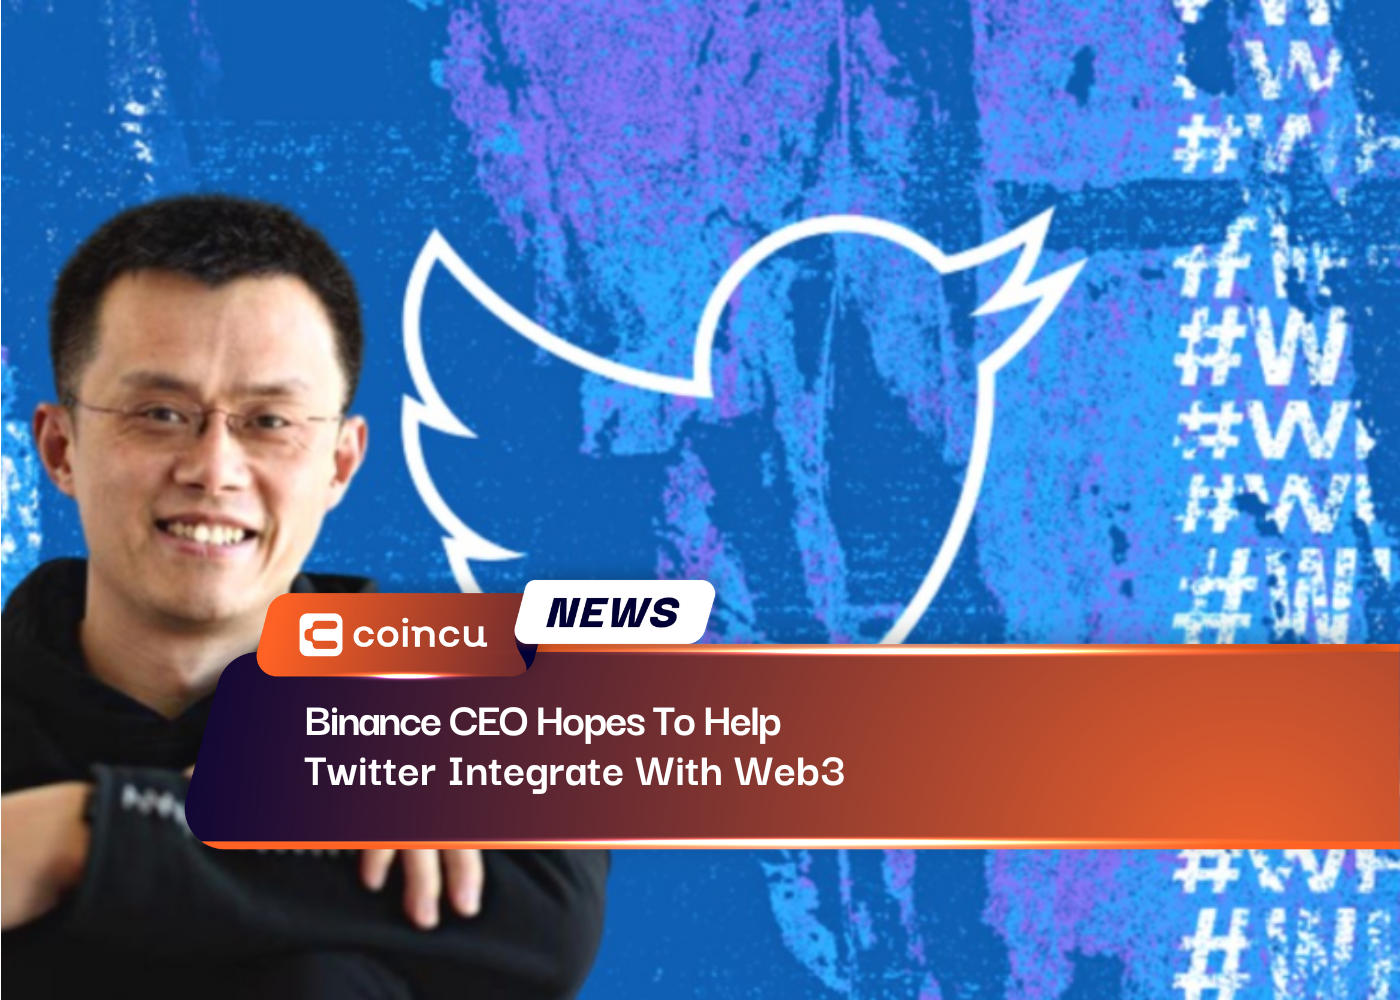 Binance CEO Hopes To Help Twitter Integrate With Web3